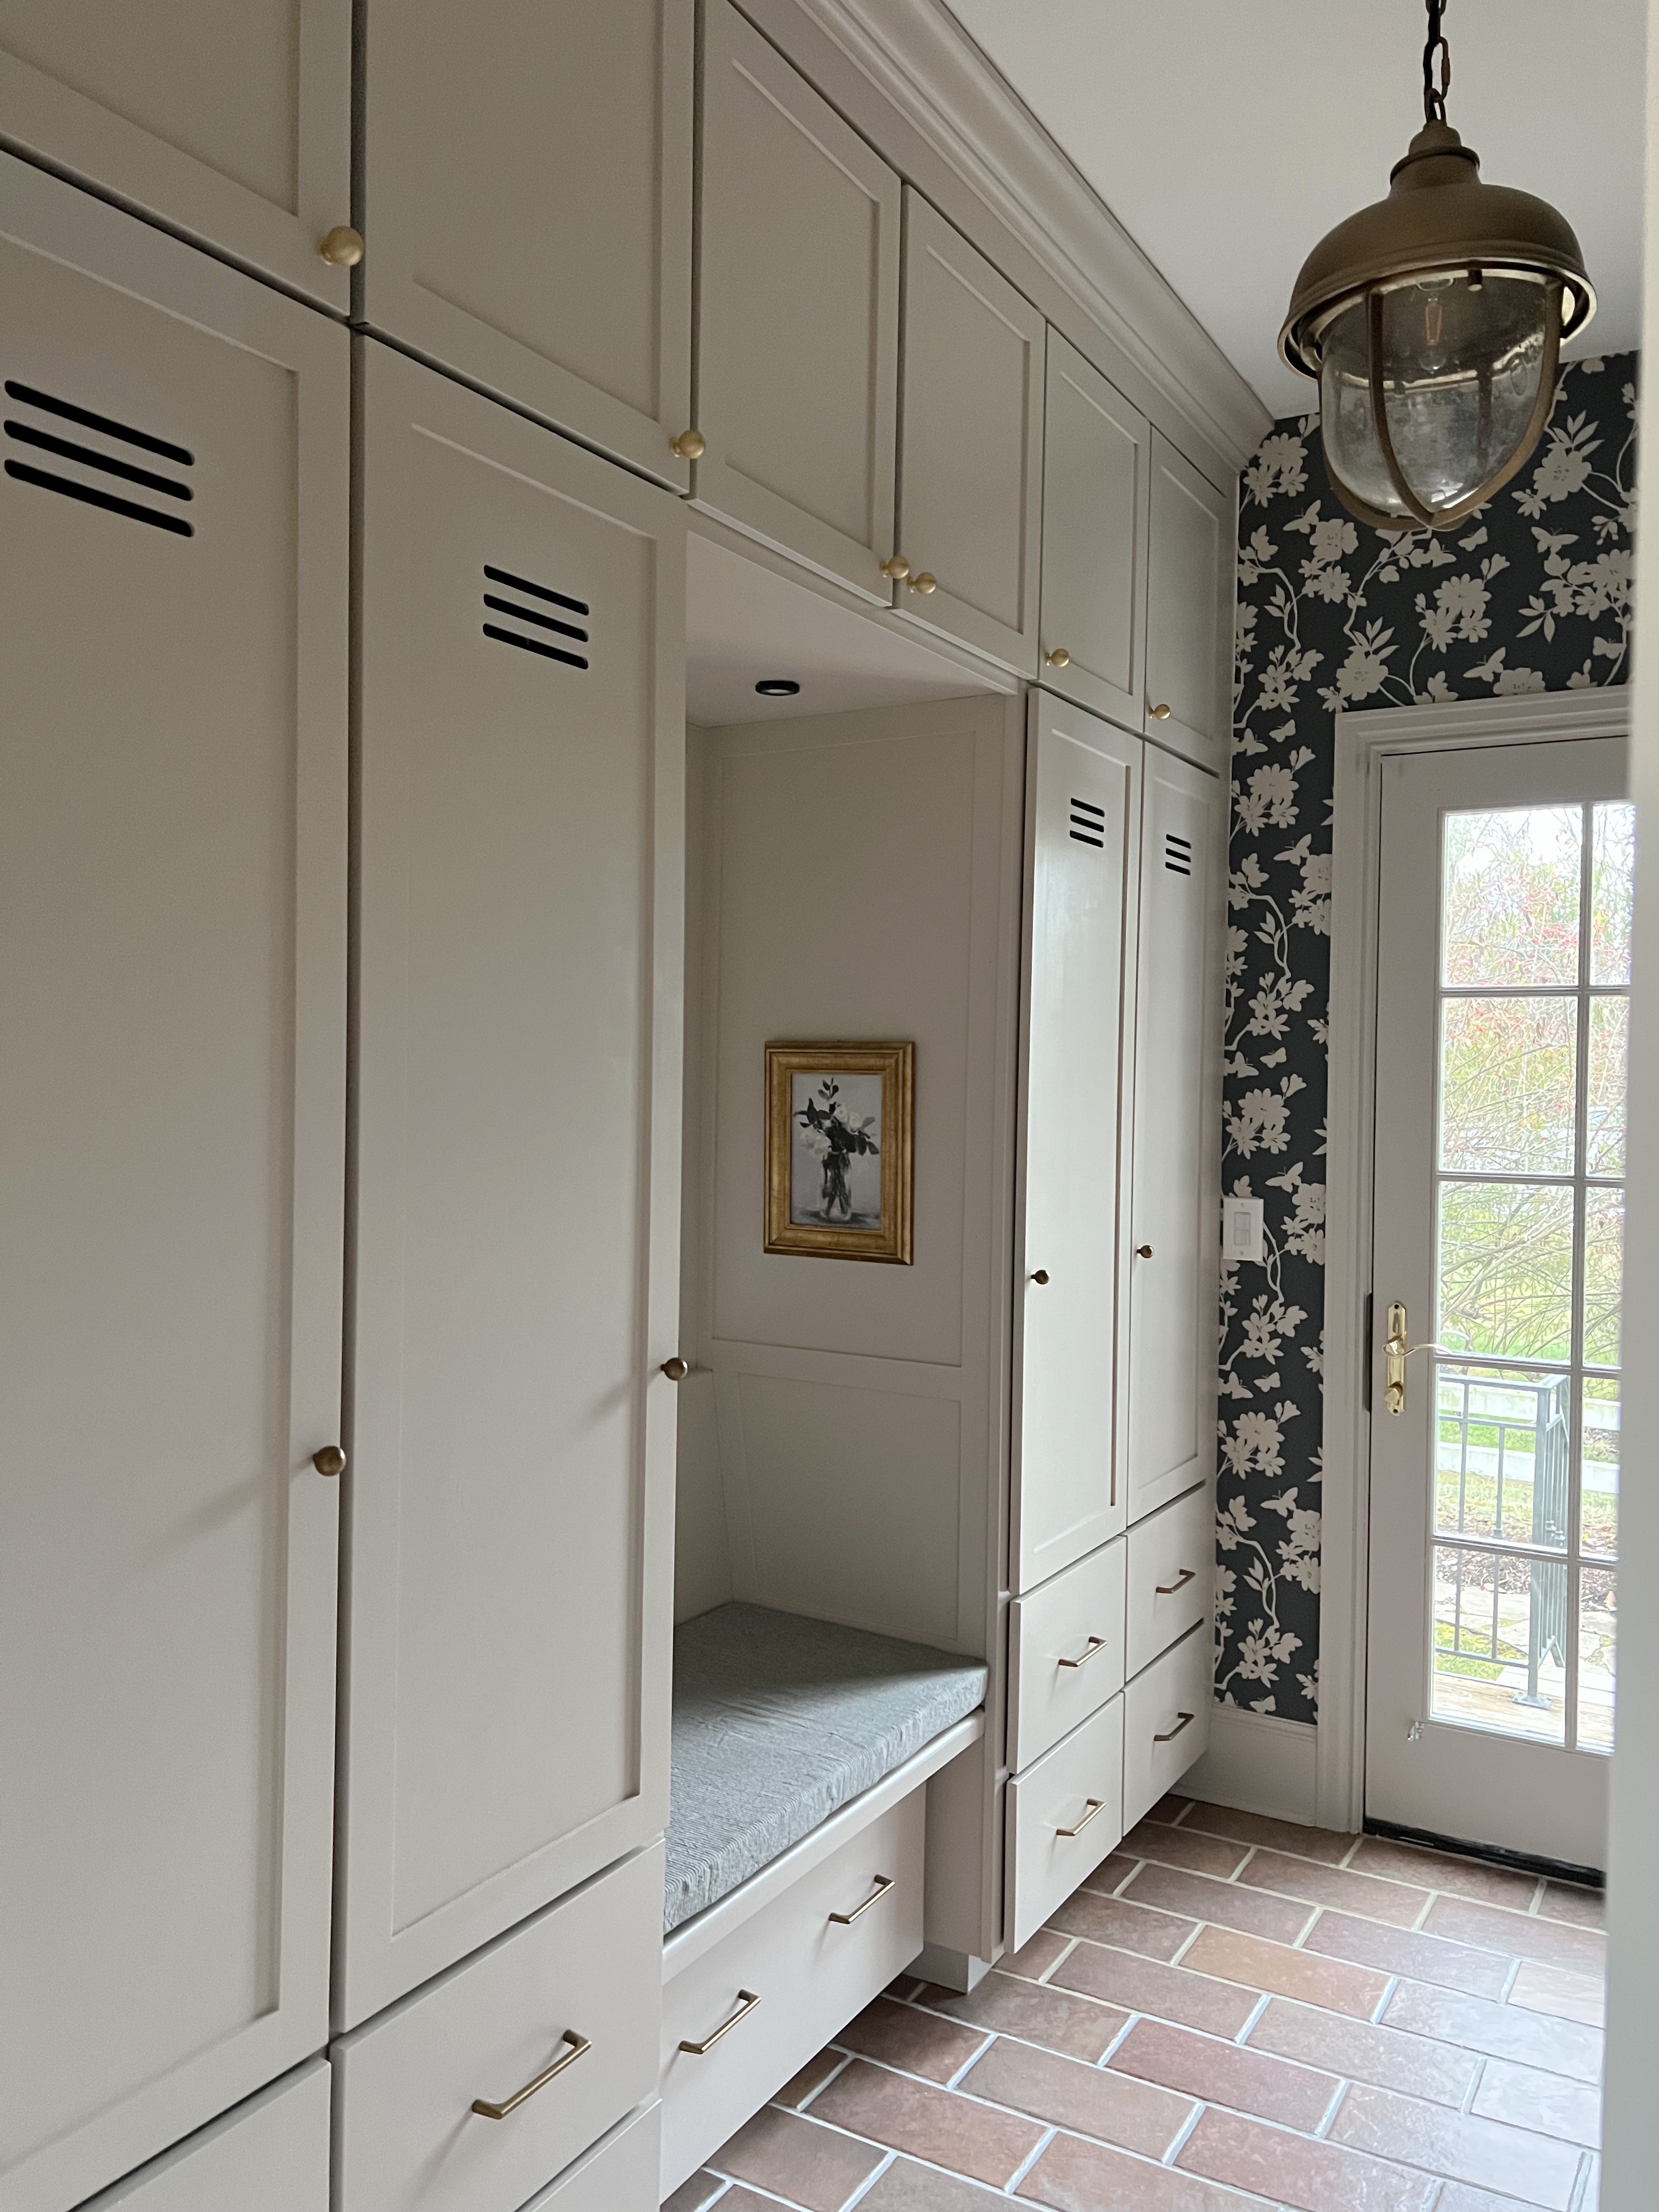 How to Paint Cabinets: mudroom cabinets painted in smokey beige.